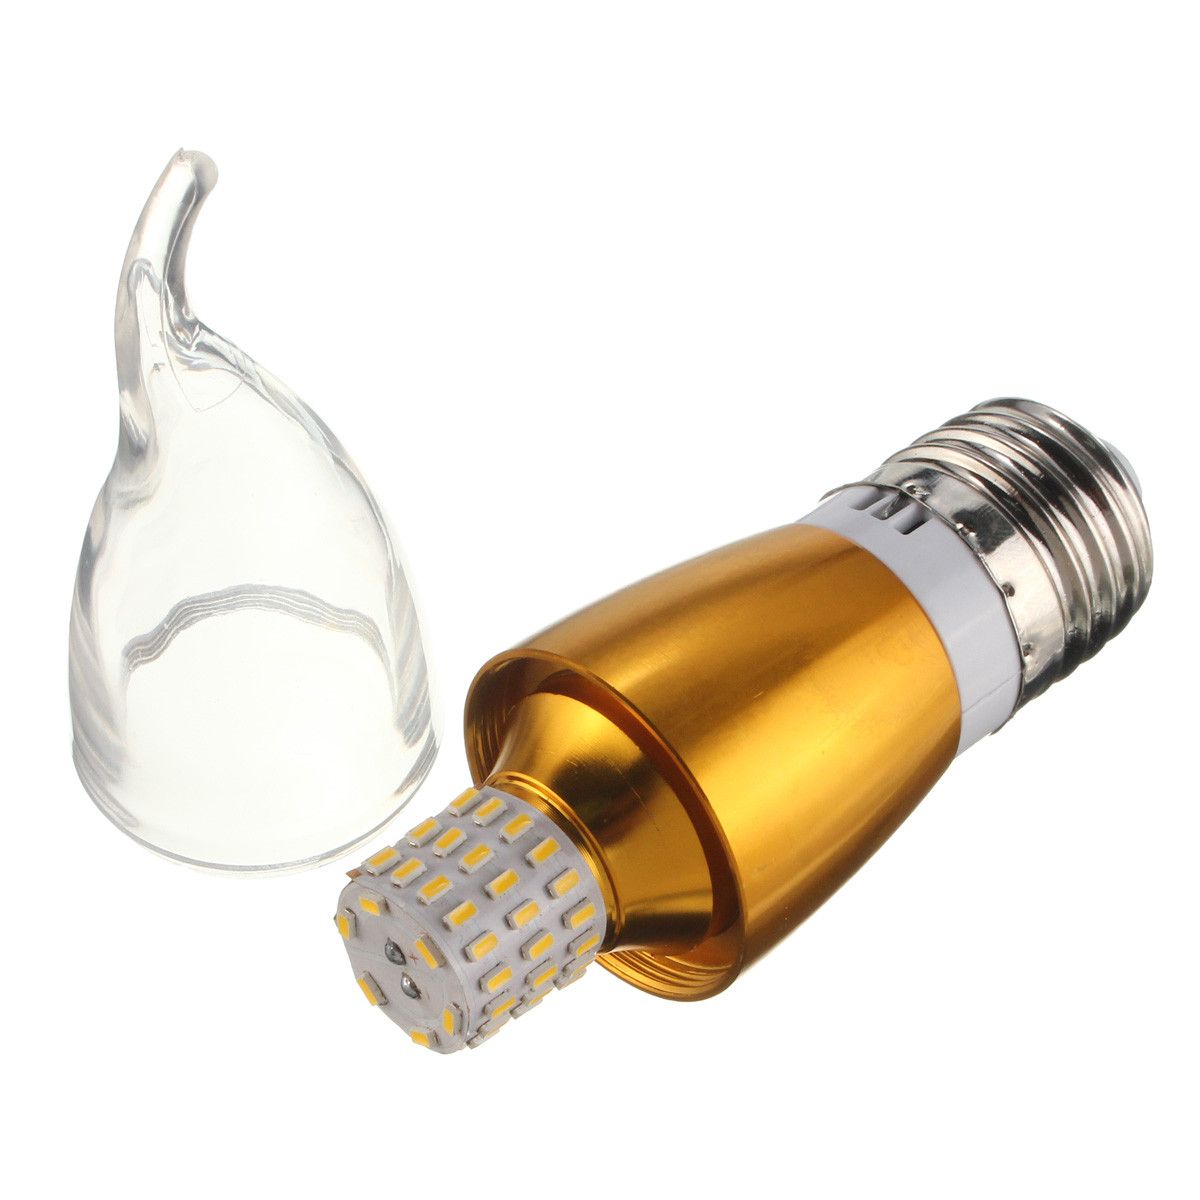 Dimmable-E27-E14-E12-60-SMD-3014-580LM-LED-Candle-Bulb-Golden-Glass-Warm-White-White-Lamp-AC-110V-1041641